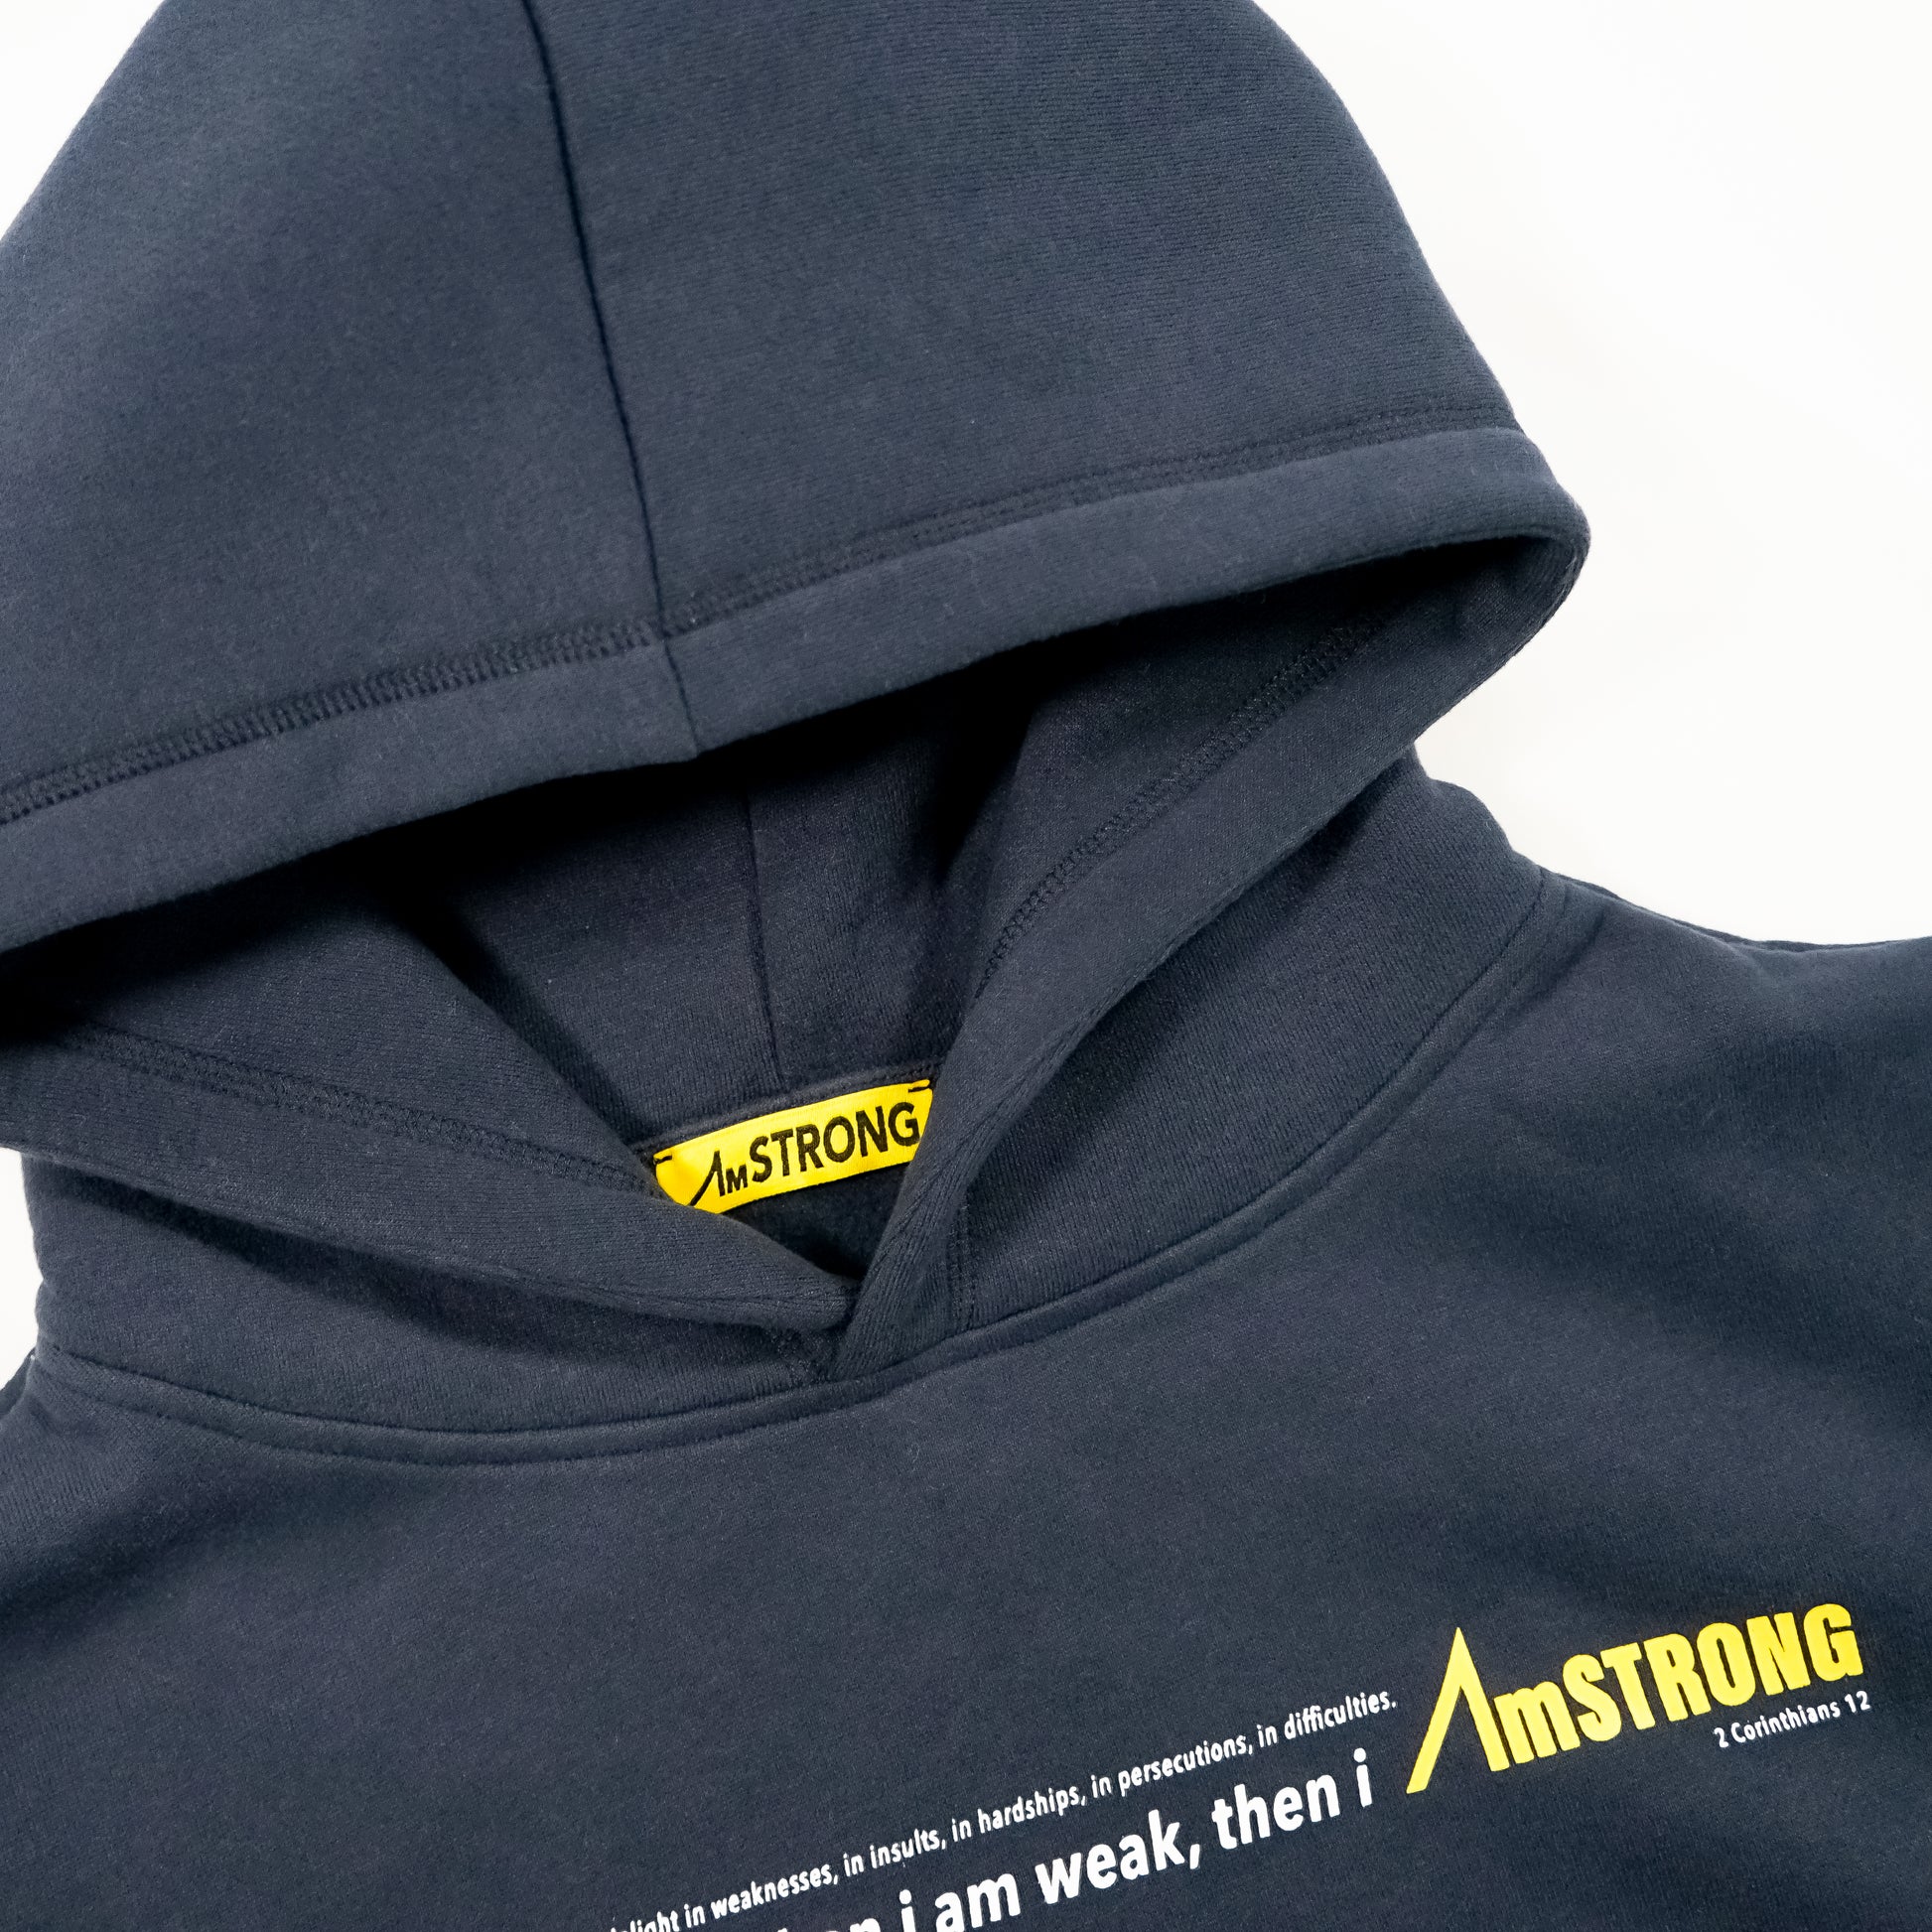 navy blue hoodie with yellow details